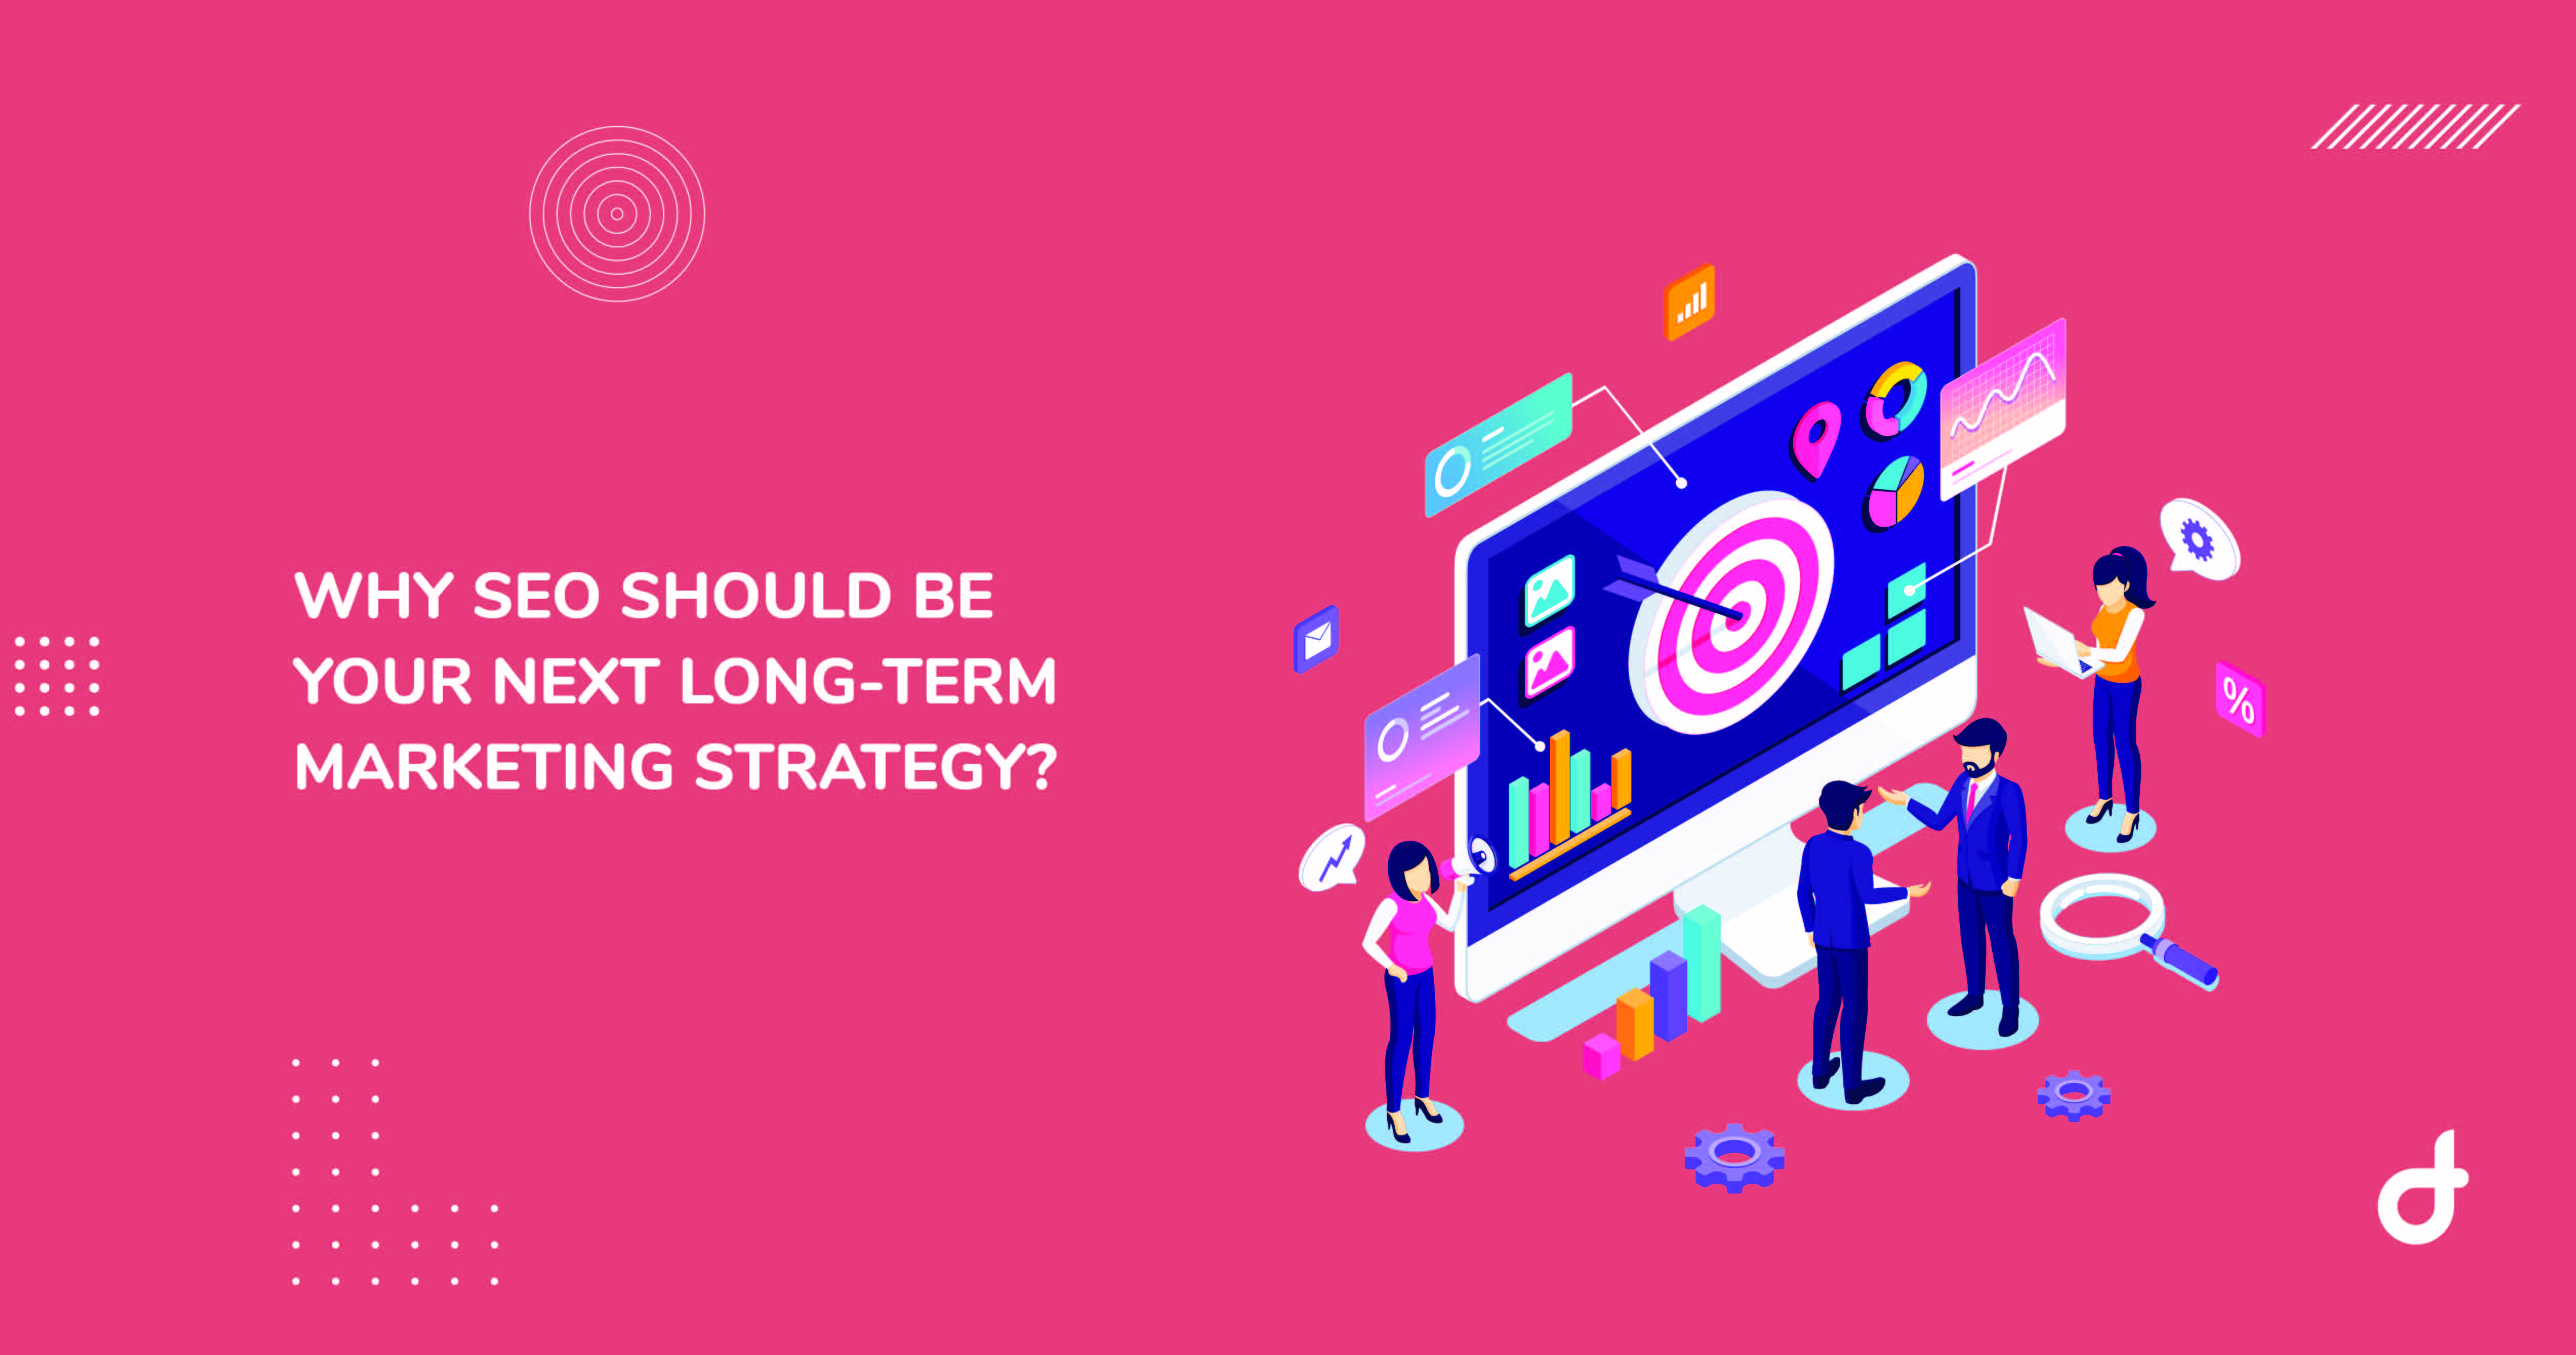 Why SEO Should be Your Next Long-Term Marketing Strategy